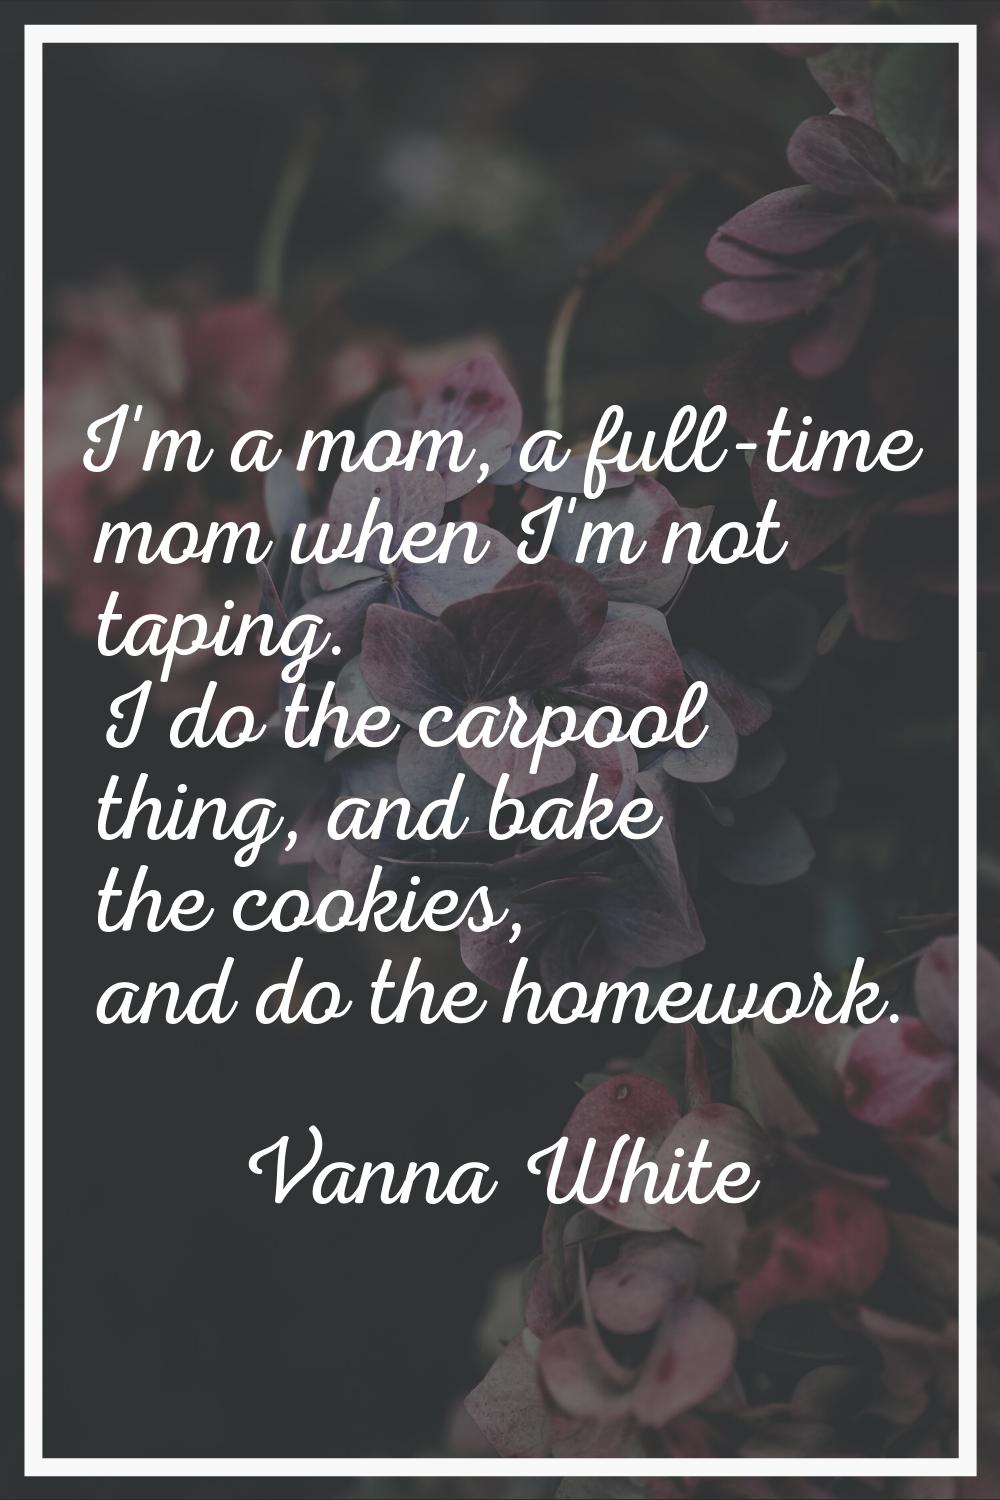 I'm a mom, a full-time mom when I'm not taping. I do the carpool thing, and bake the cookies, and d